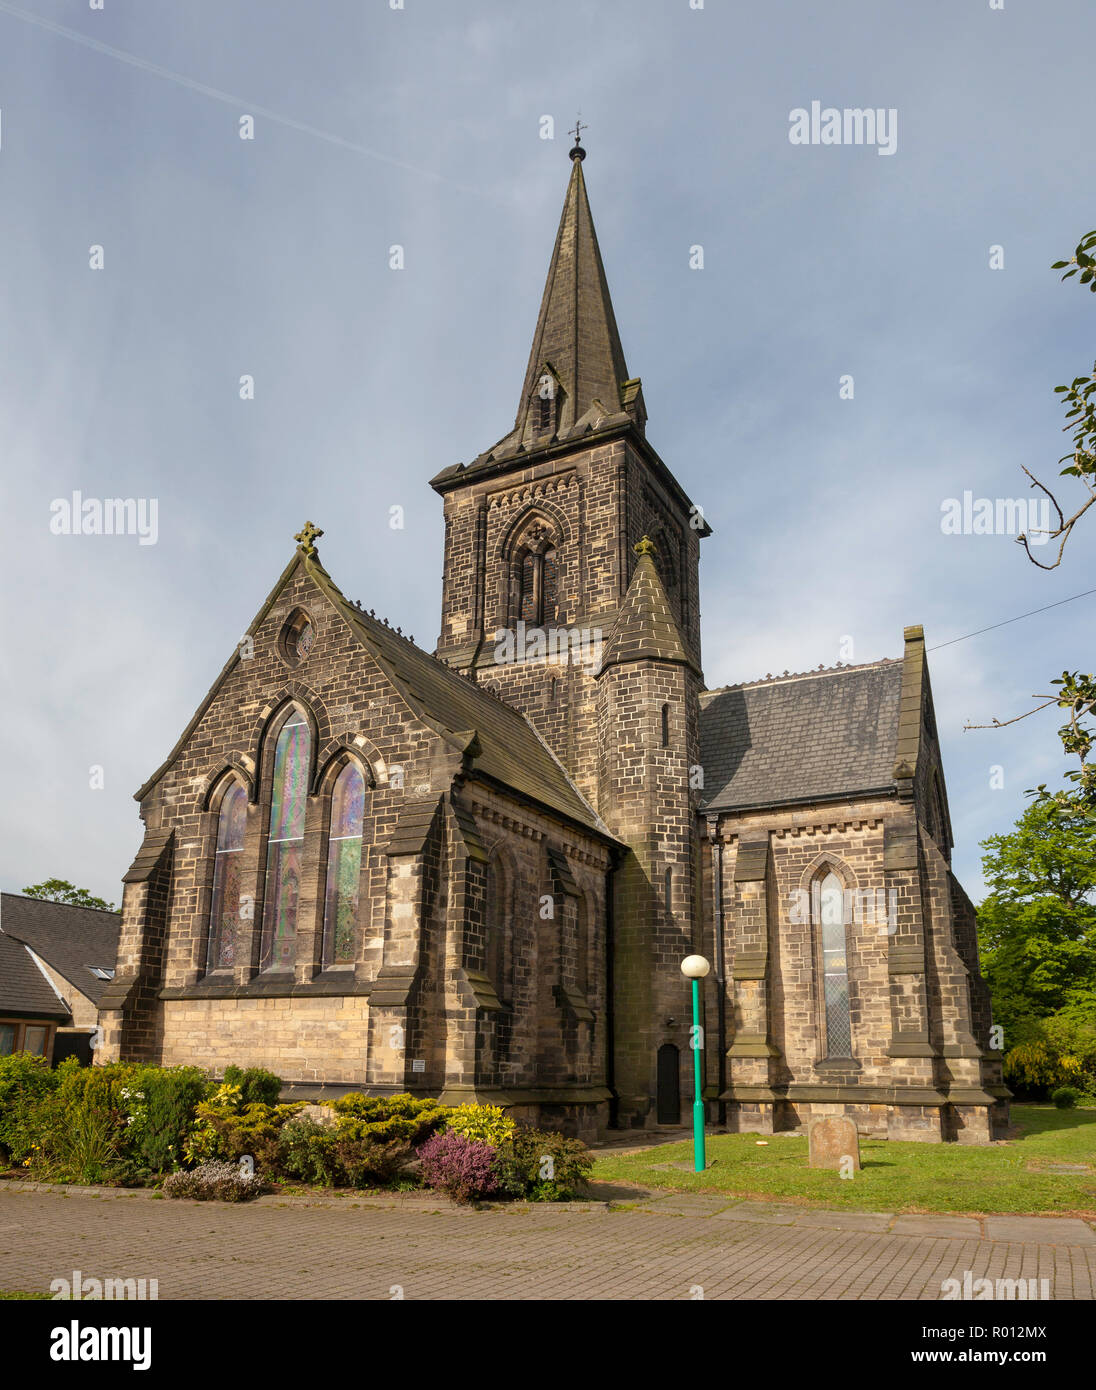 External view of St. Mary's, the Anglican parish churc at Garforth, near Leeds in West Yorkshire Stock Photo